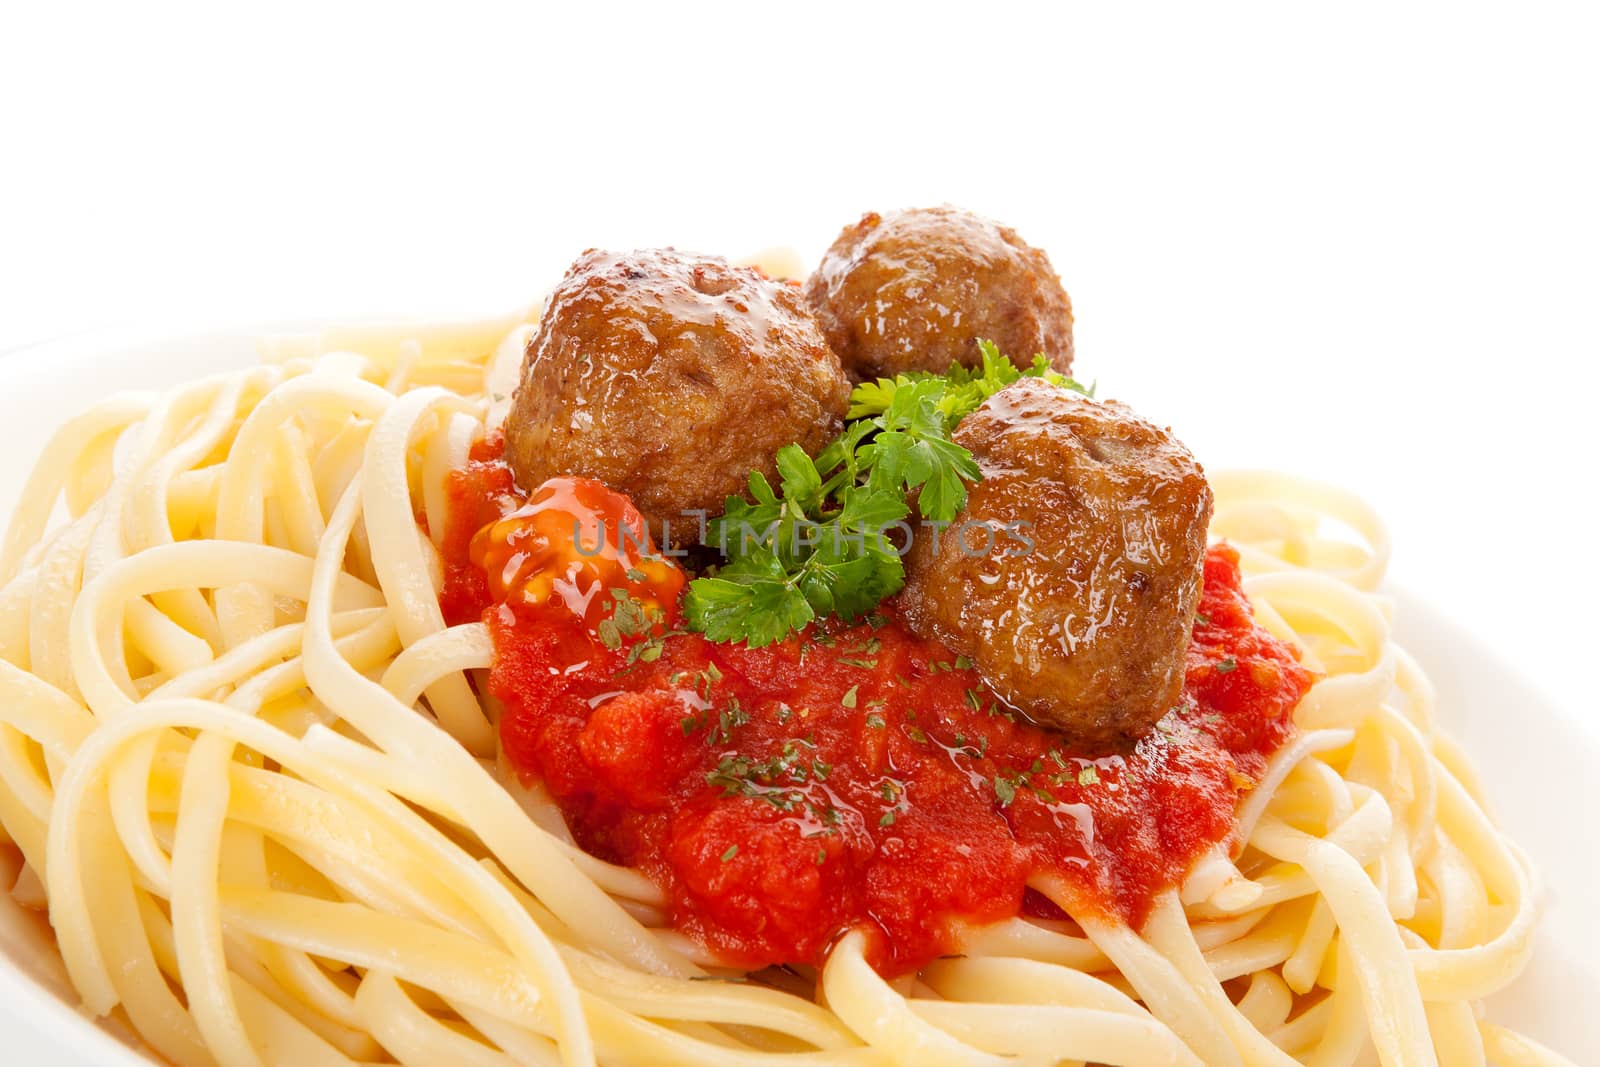 Pasta with tomato sauce and meatballs. by eskymaks